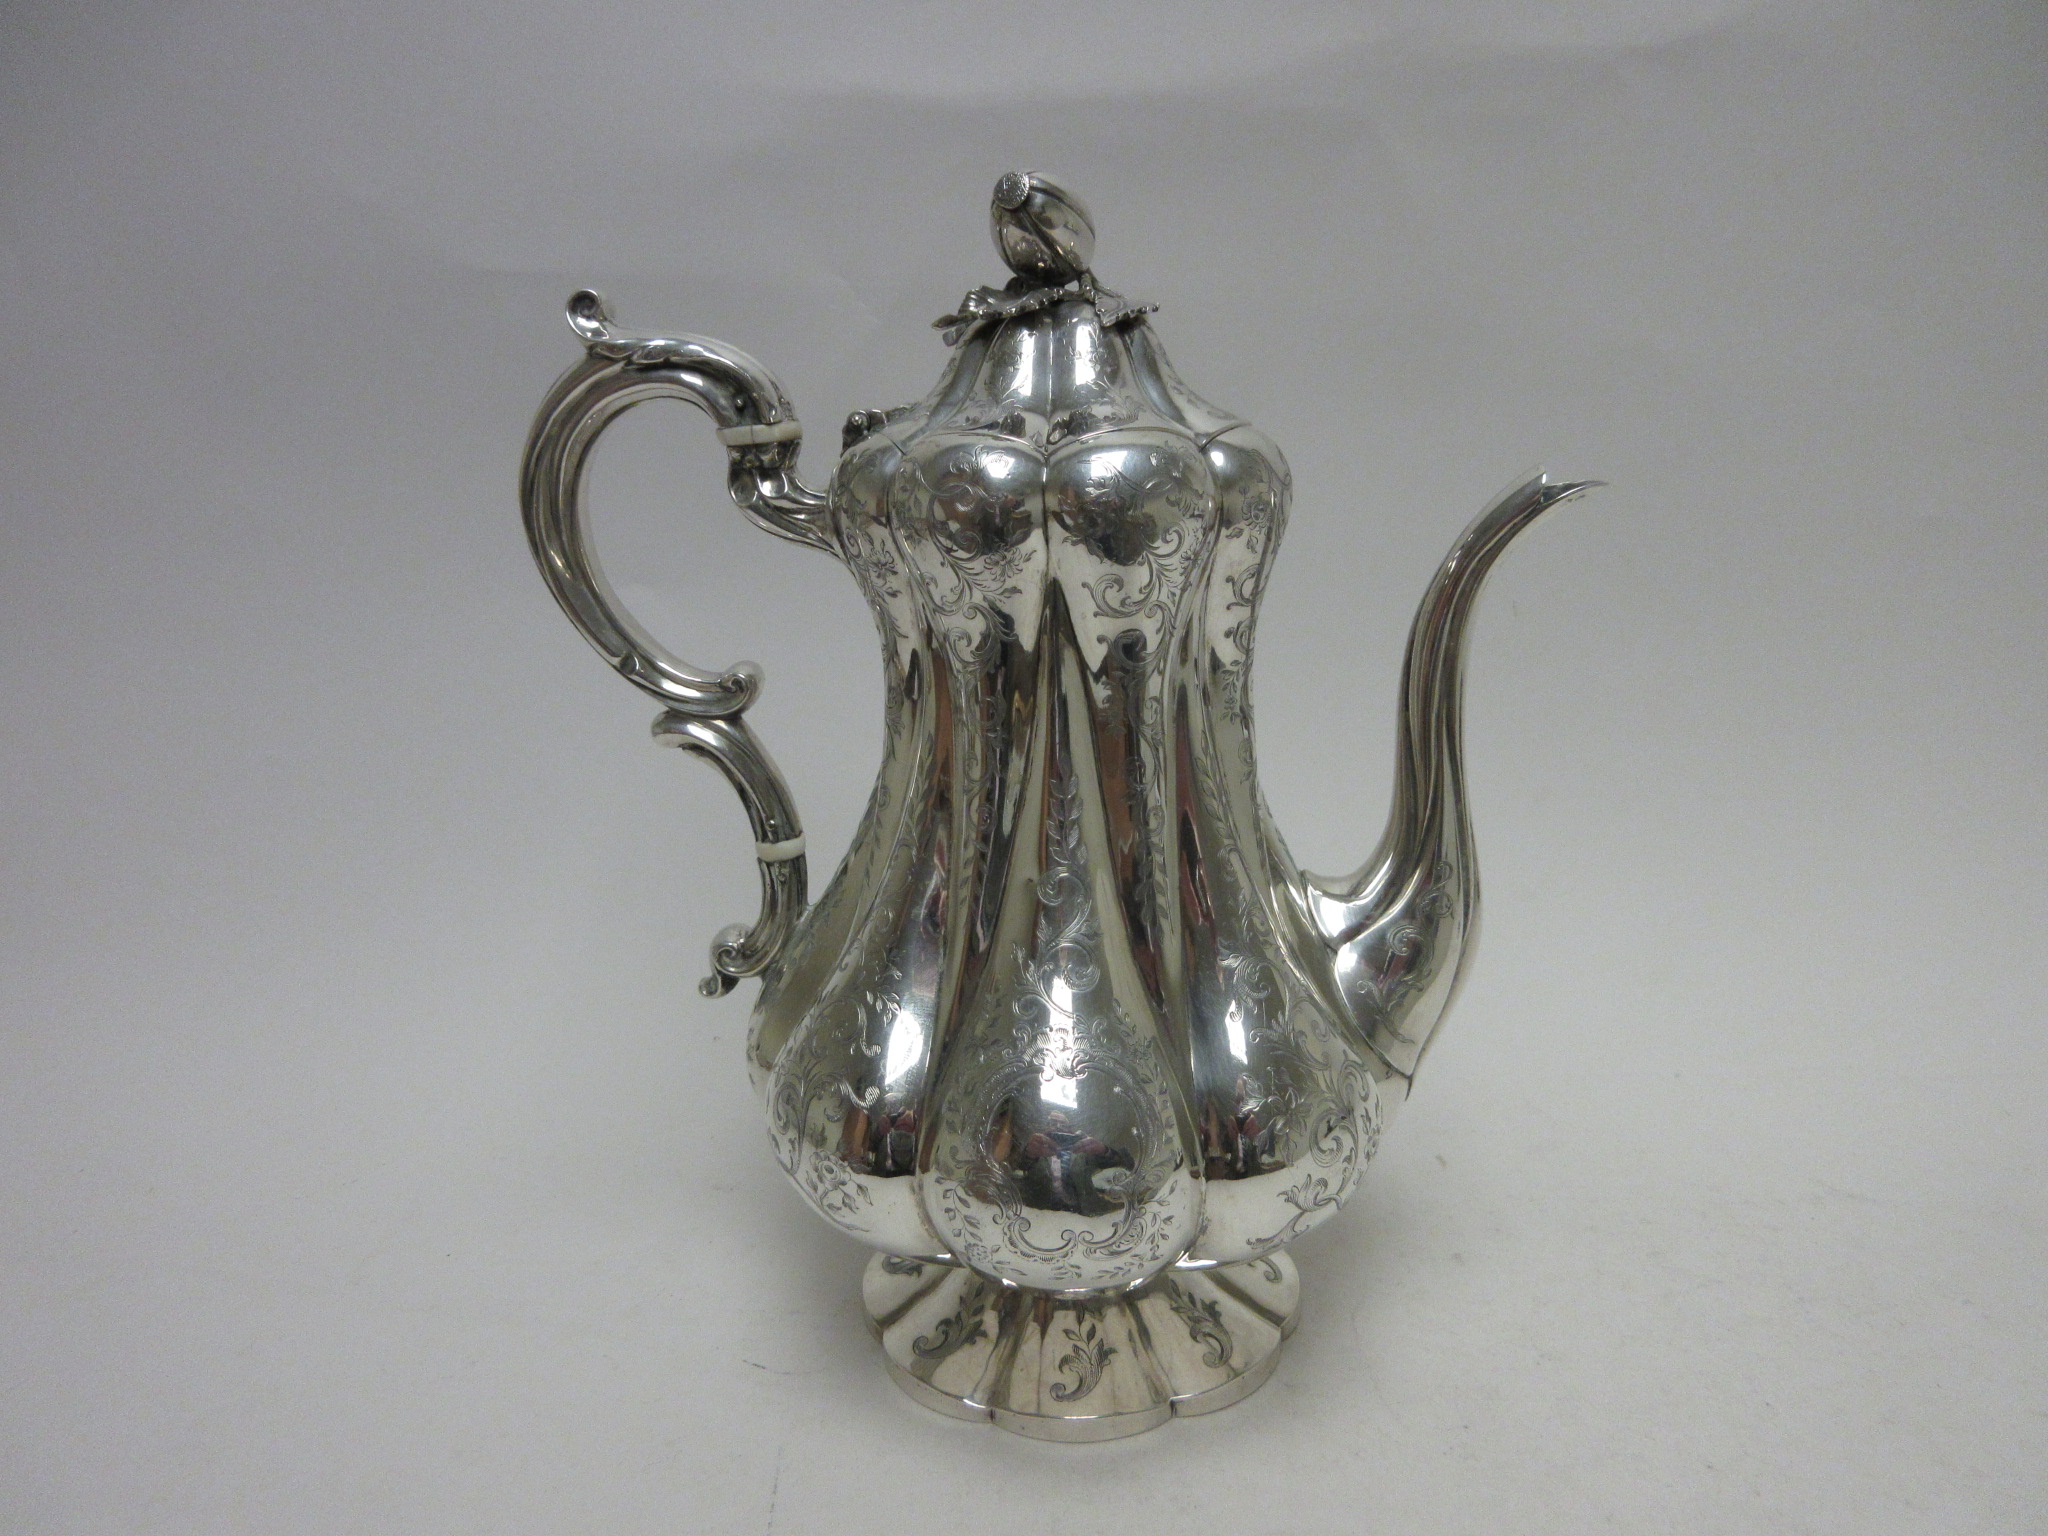 A Victorian silver Coffee Pot of pear shape with leafage scroll engraving, melon finial, London - Image 6 of 7